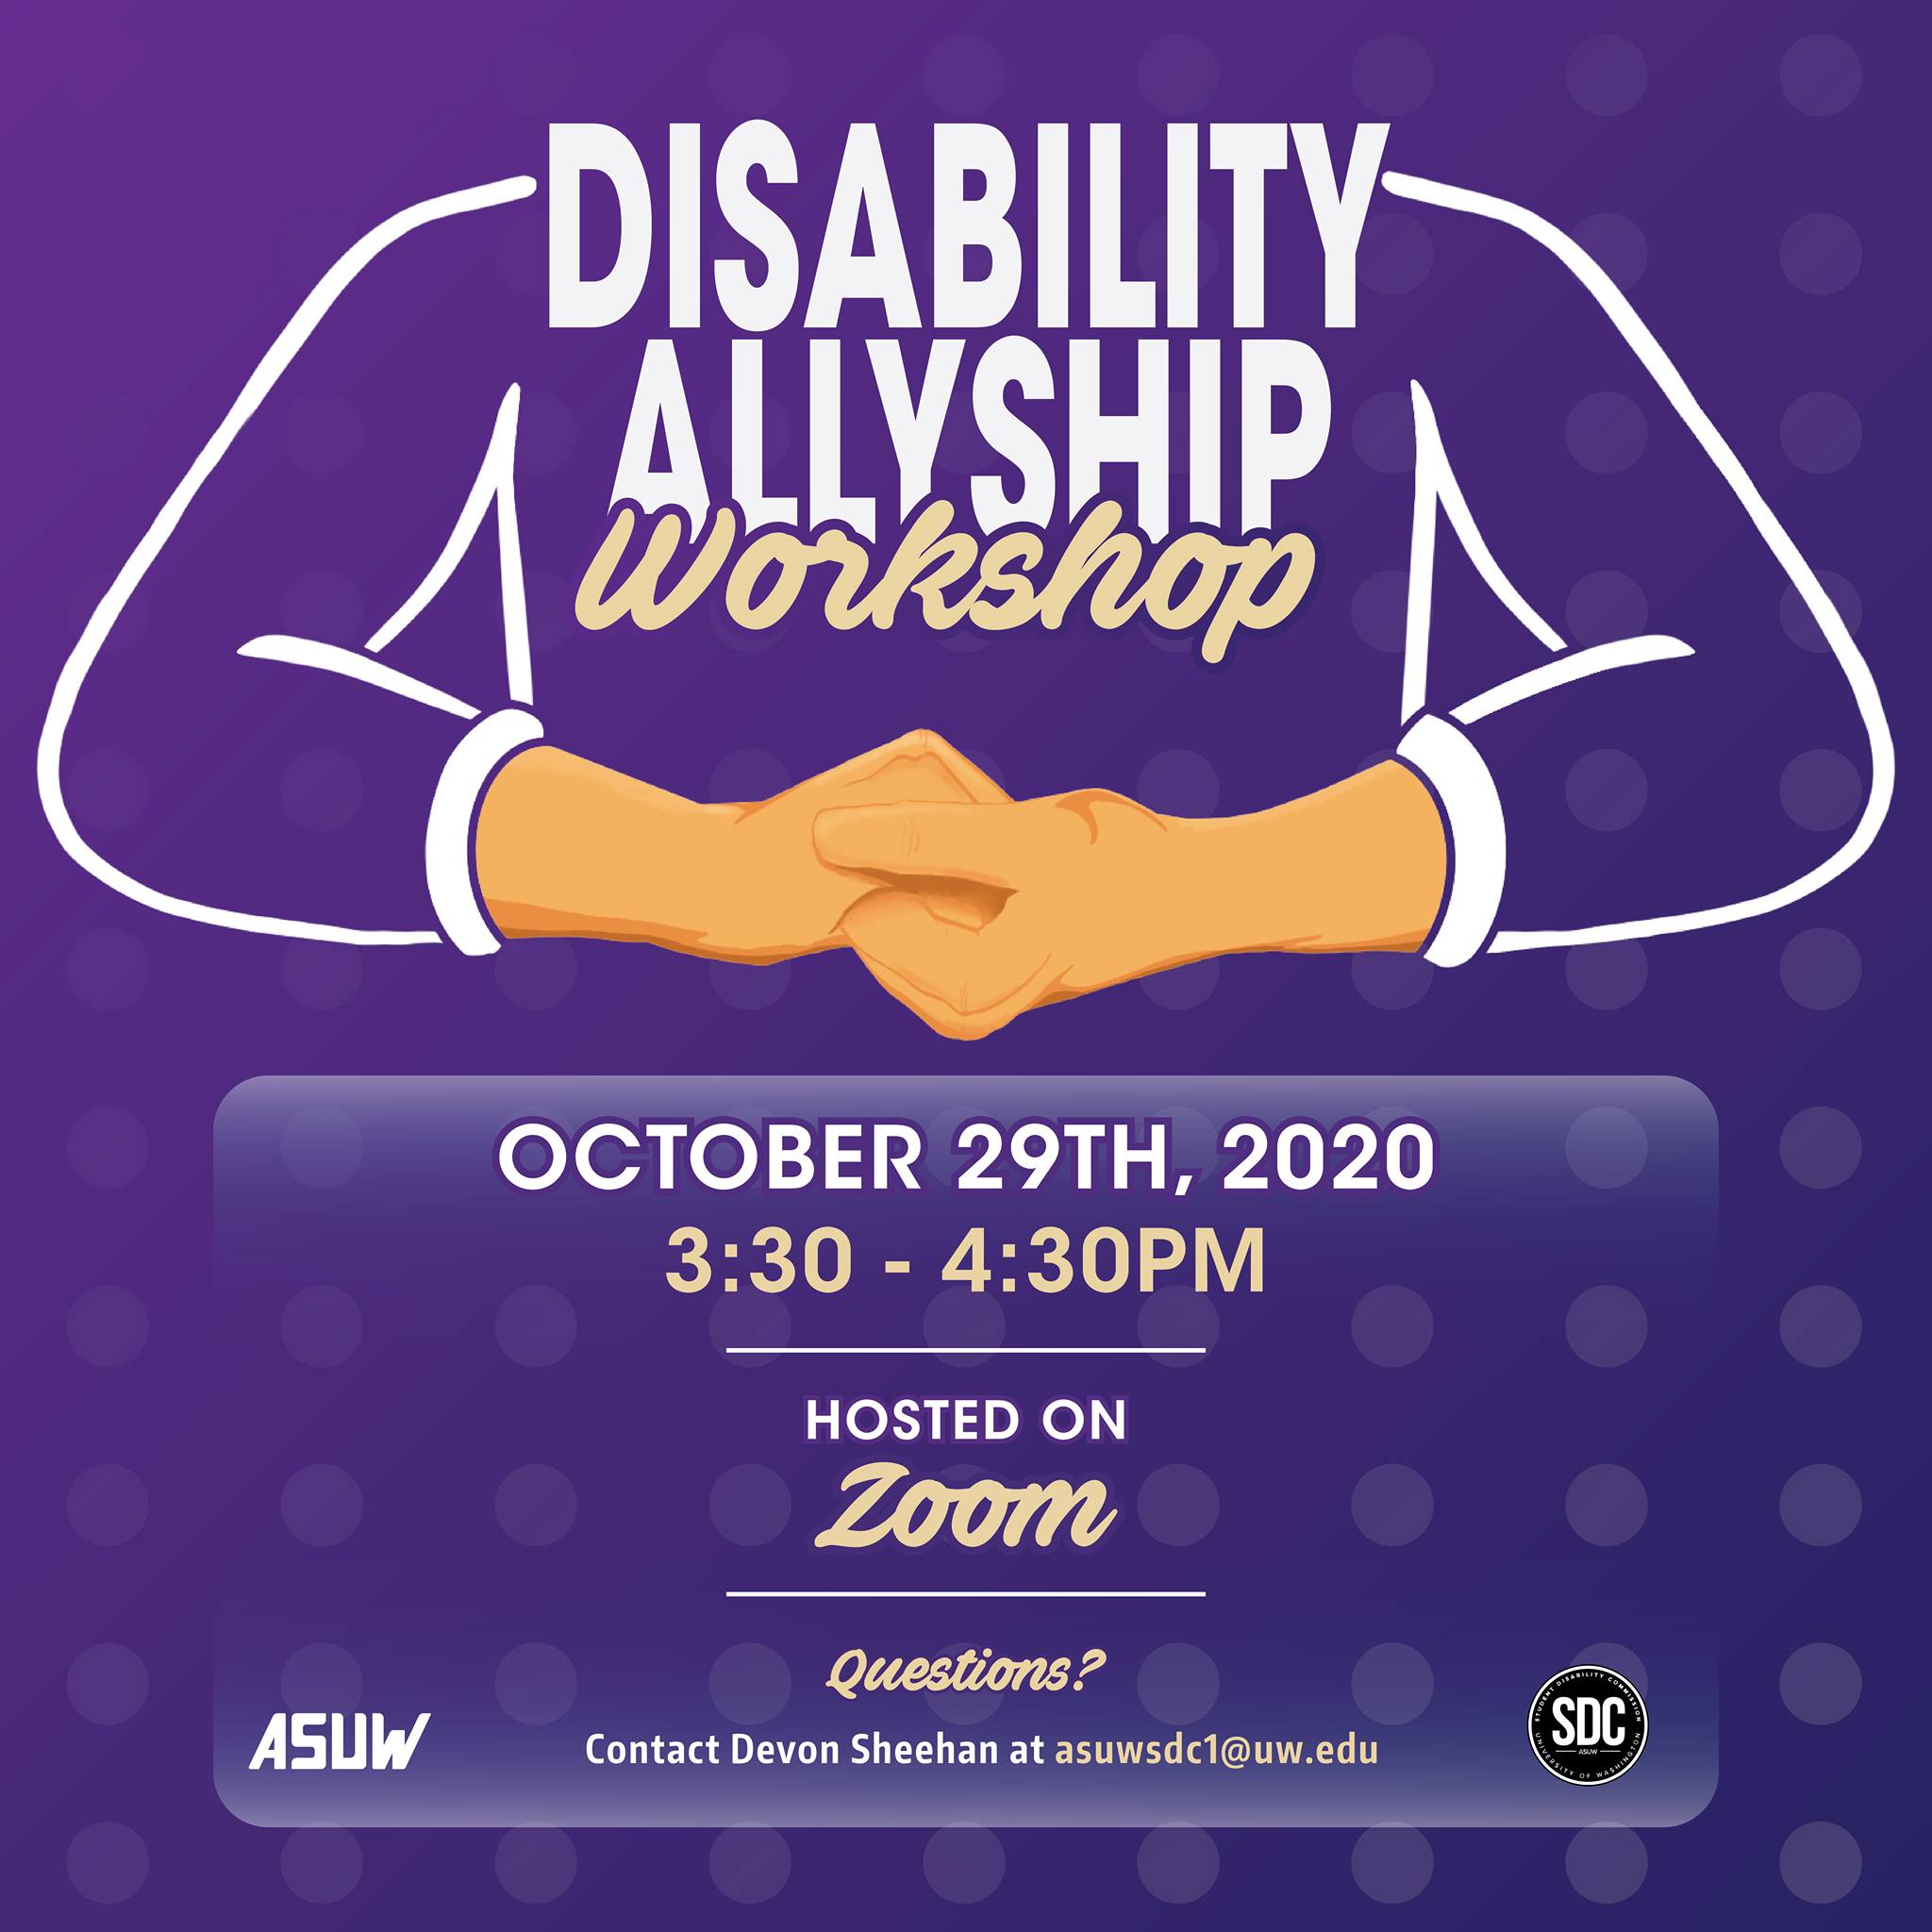 Image Description: Purple background with hands in the ASL sign for 'allyship' (one hand clasped over the over). Text reads: "Disability Allyship Workshop. October 29th, 2020 3:30-4:30PM. Hosted on Zoom. Questions? Contact Devon Sheehan at asuwsdc1@uw.edu." ASUW and SDC logos at the bottom.